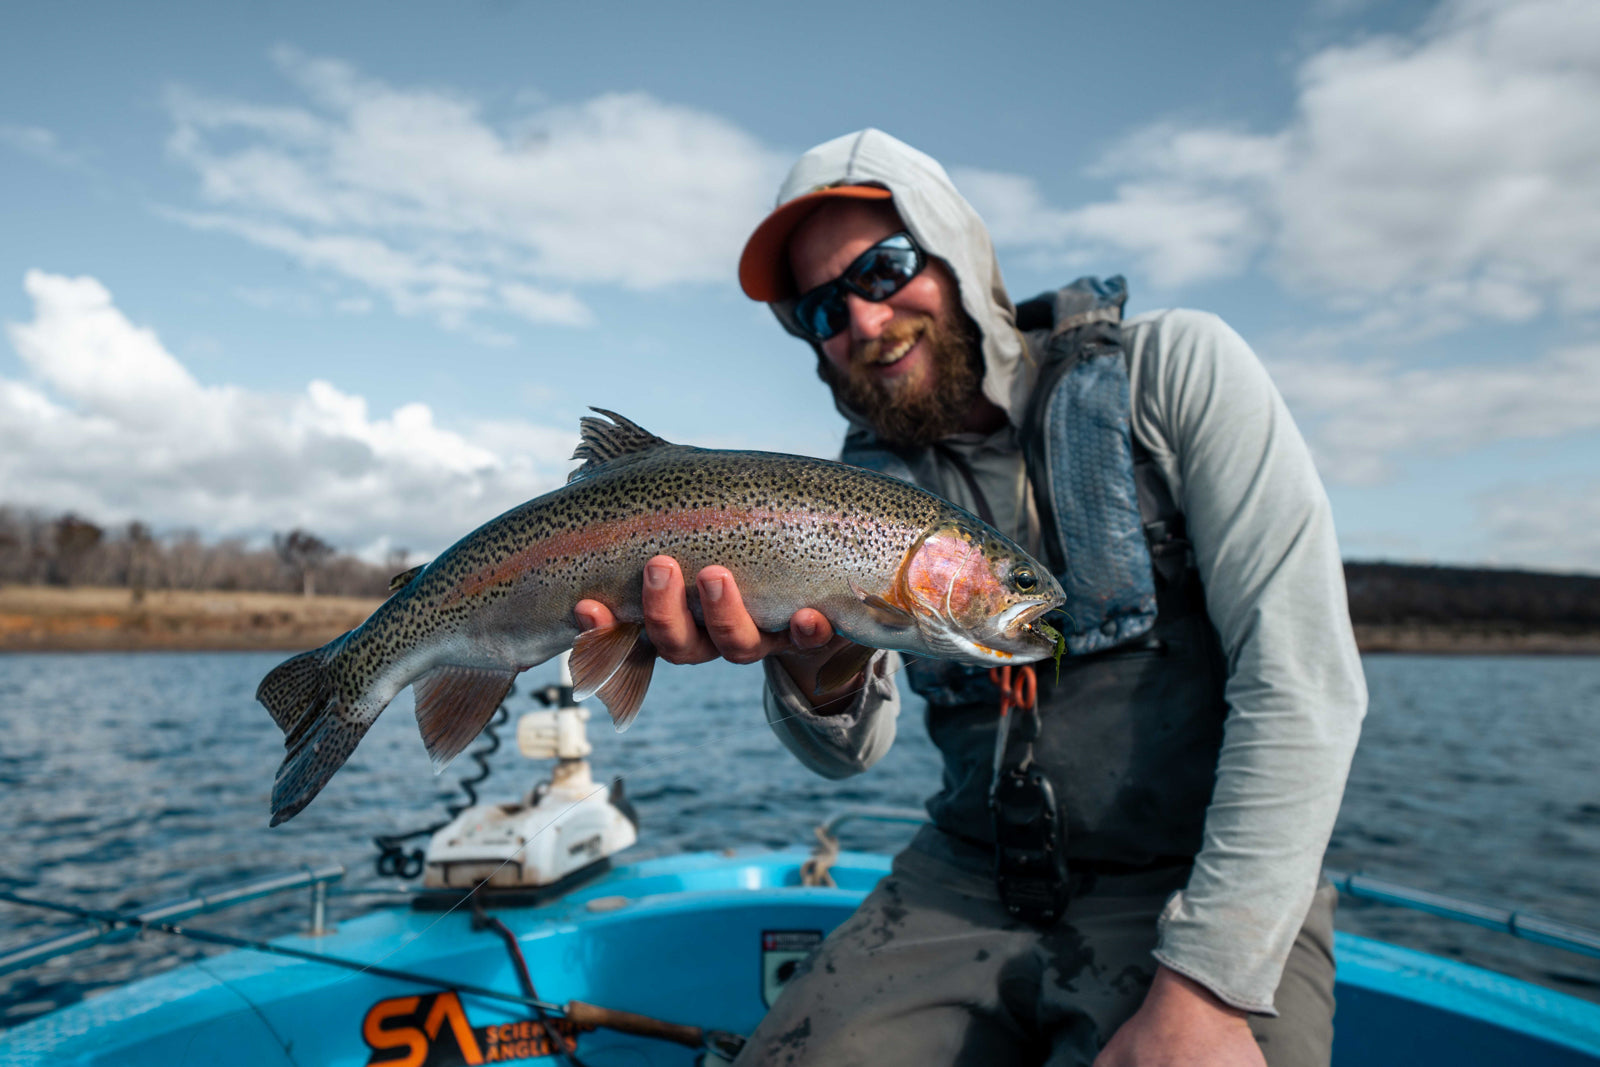 Mickey Finn holding a large rainbow trout caught fly fishing on Lake Eucumbene in the Snowy Mountains